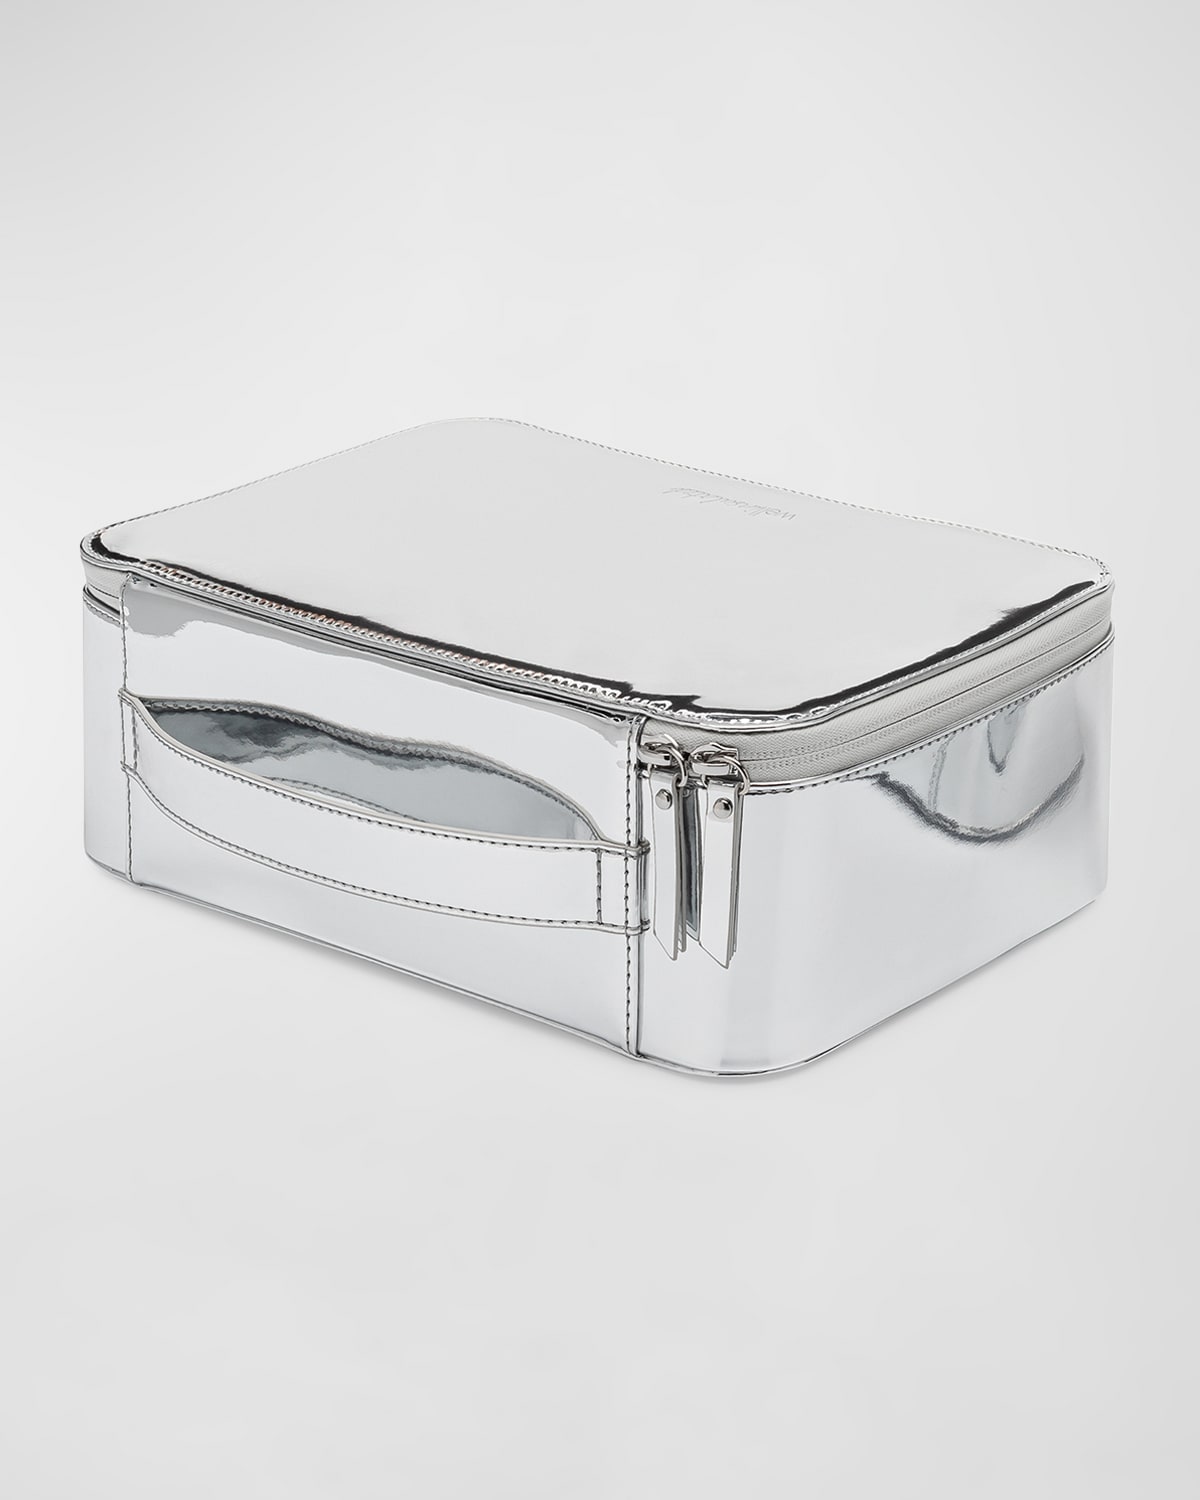 Wellinsulated Performance Travel Case In Silver